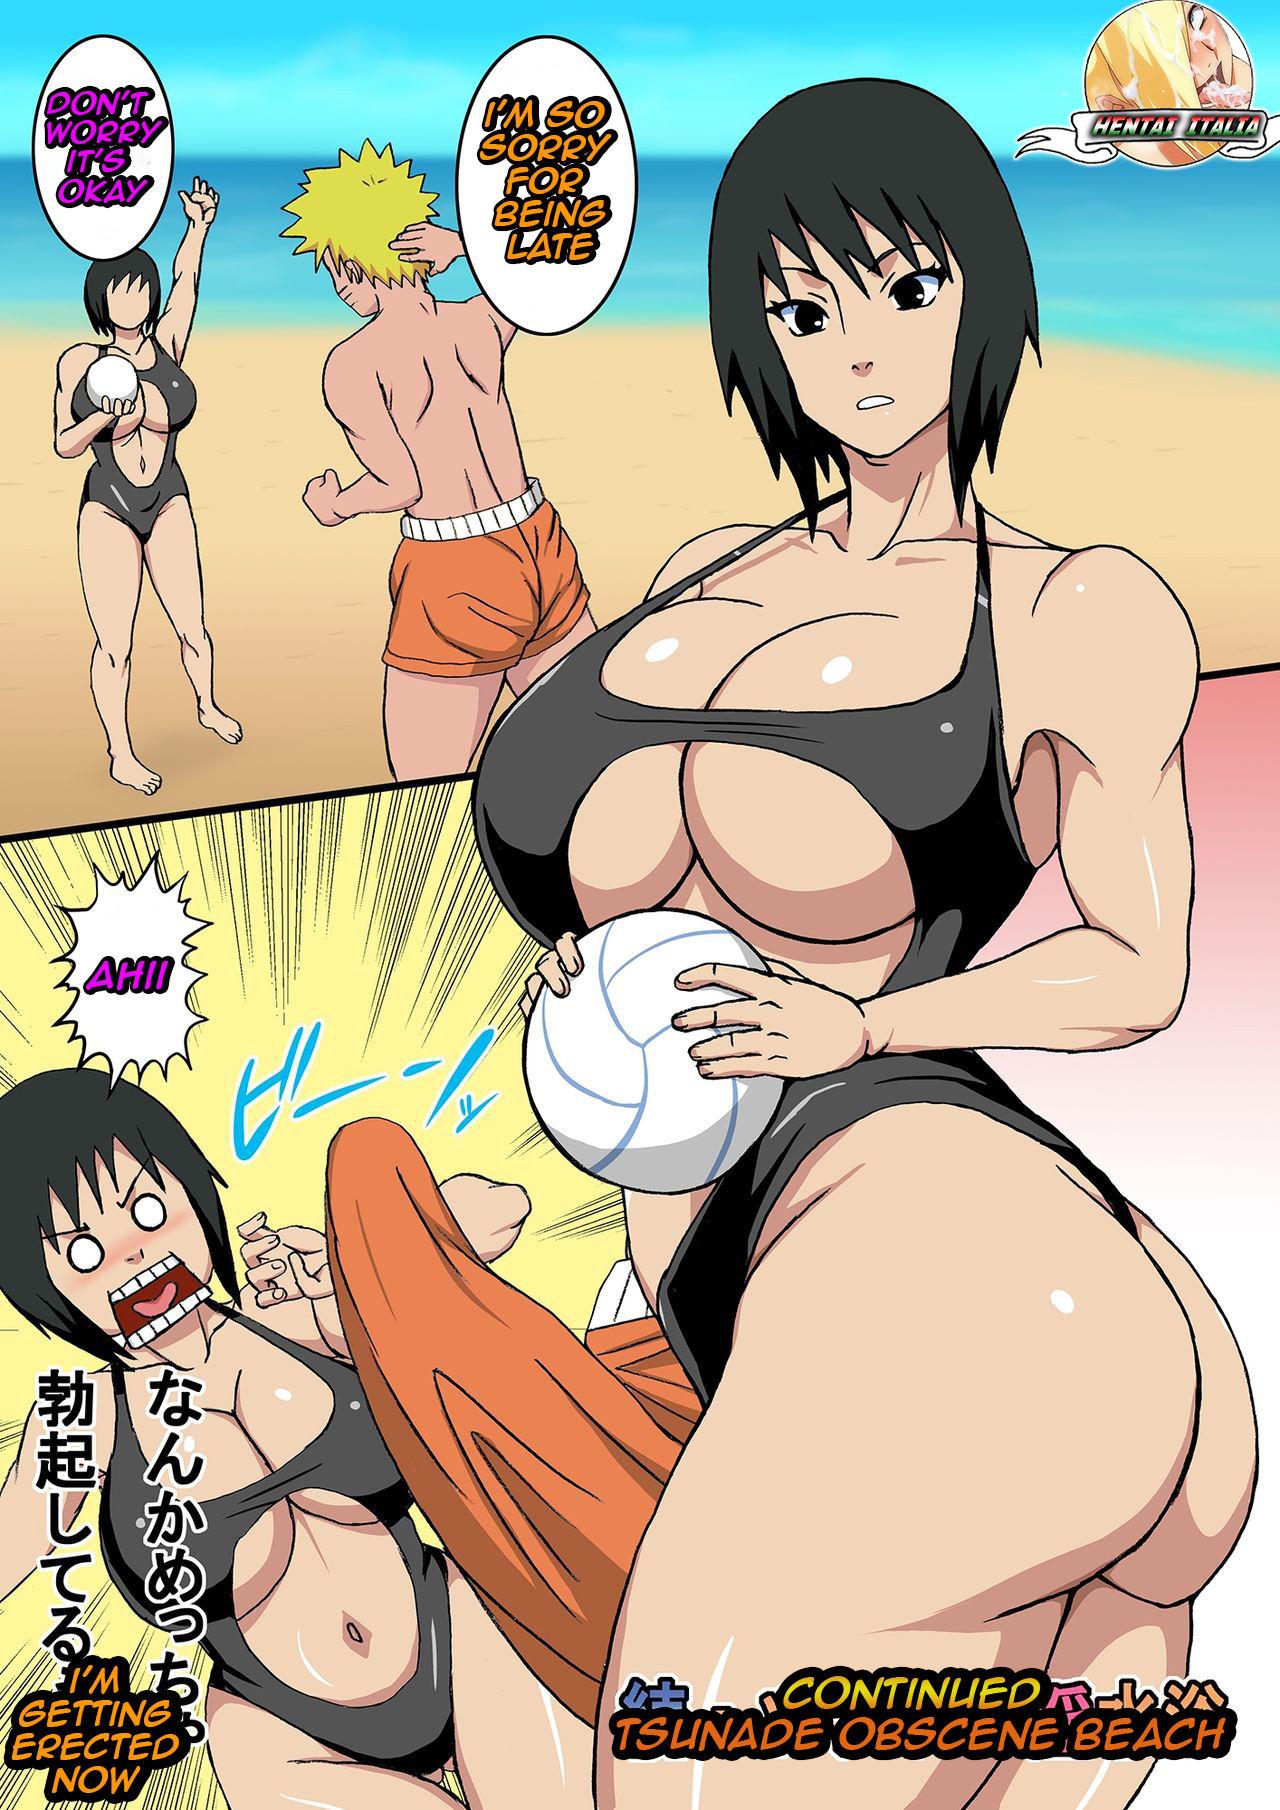 Short Hair After Tsunade's Obscene Beach - Naruto Special Locations - Page 3